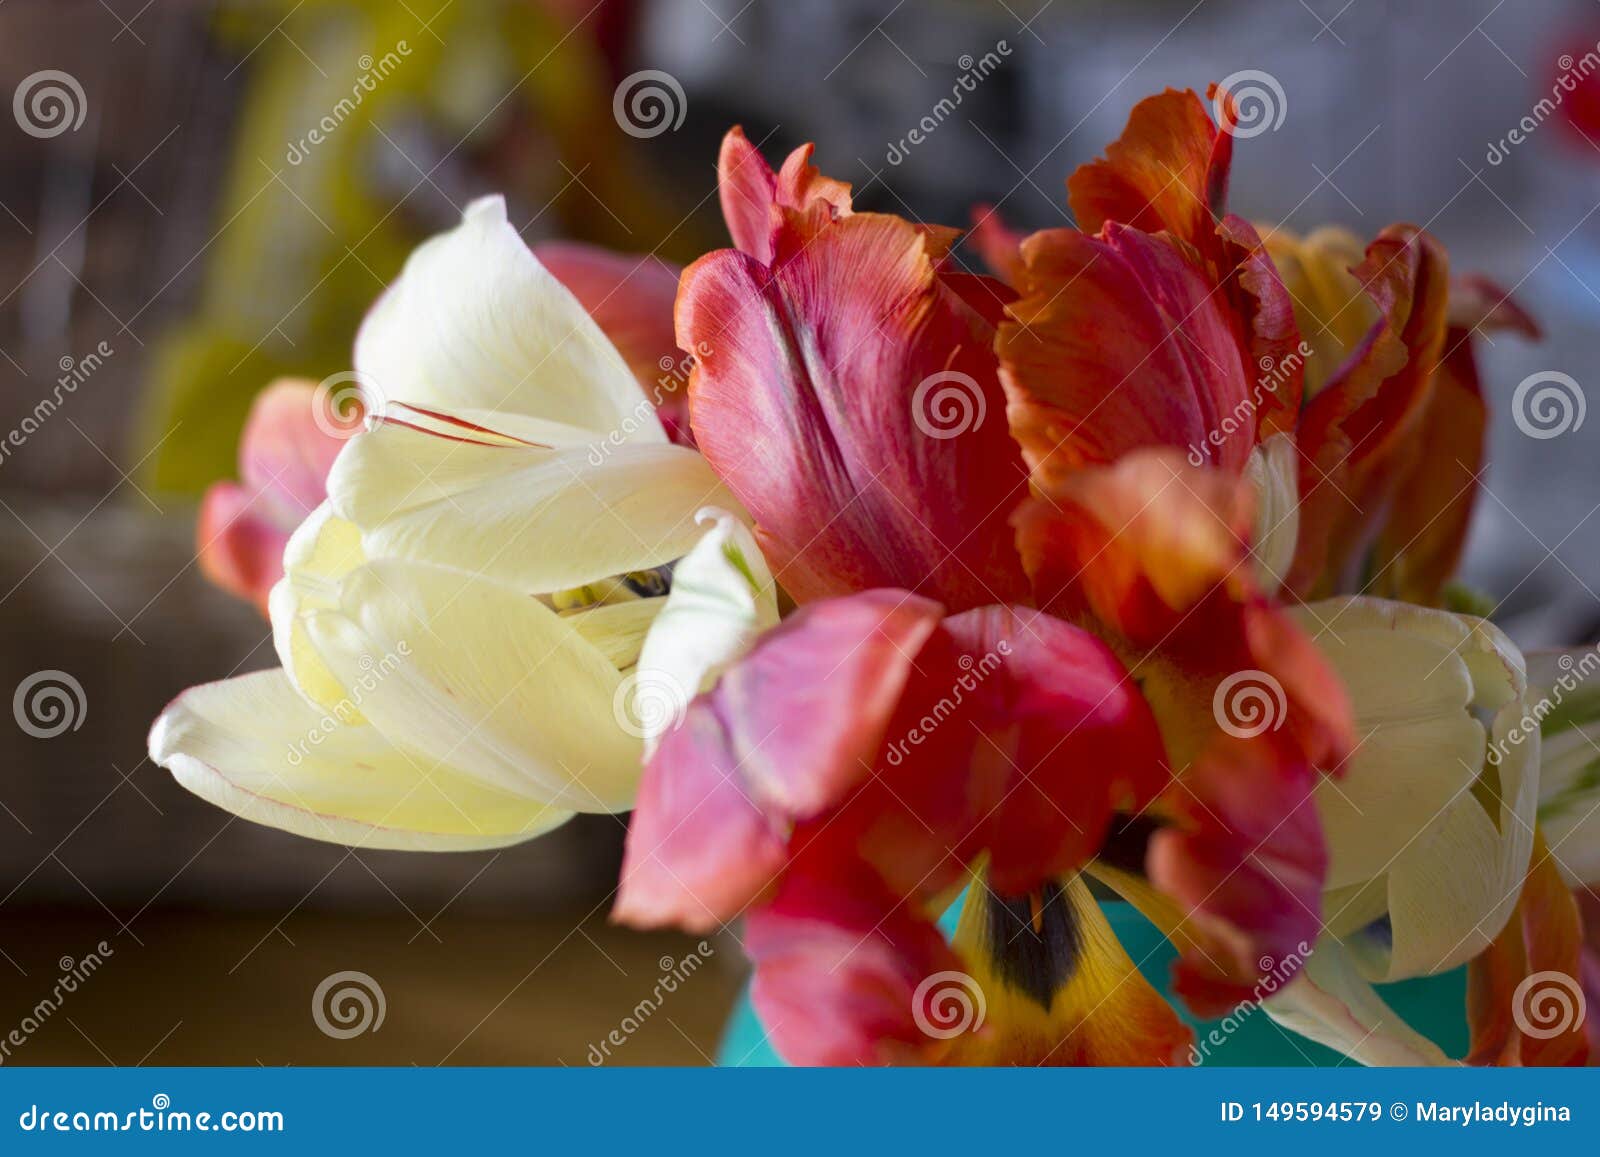 Bouquet of Tulips in a Vase. Close Up Stock Image - Image of ...